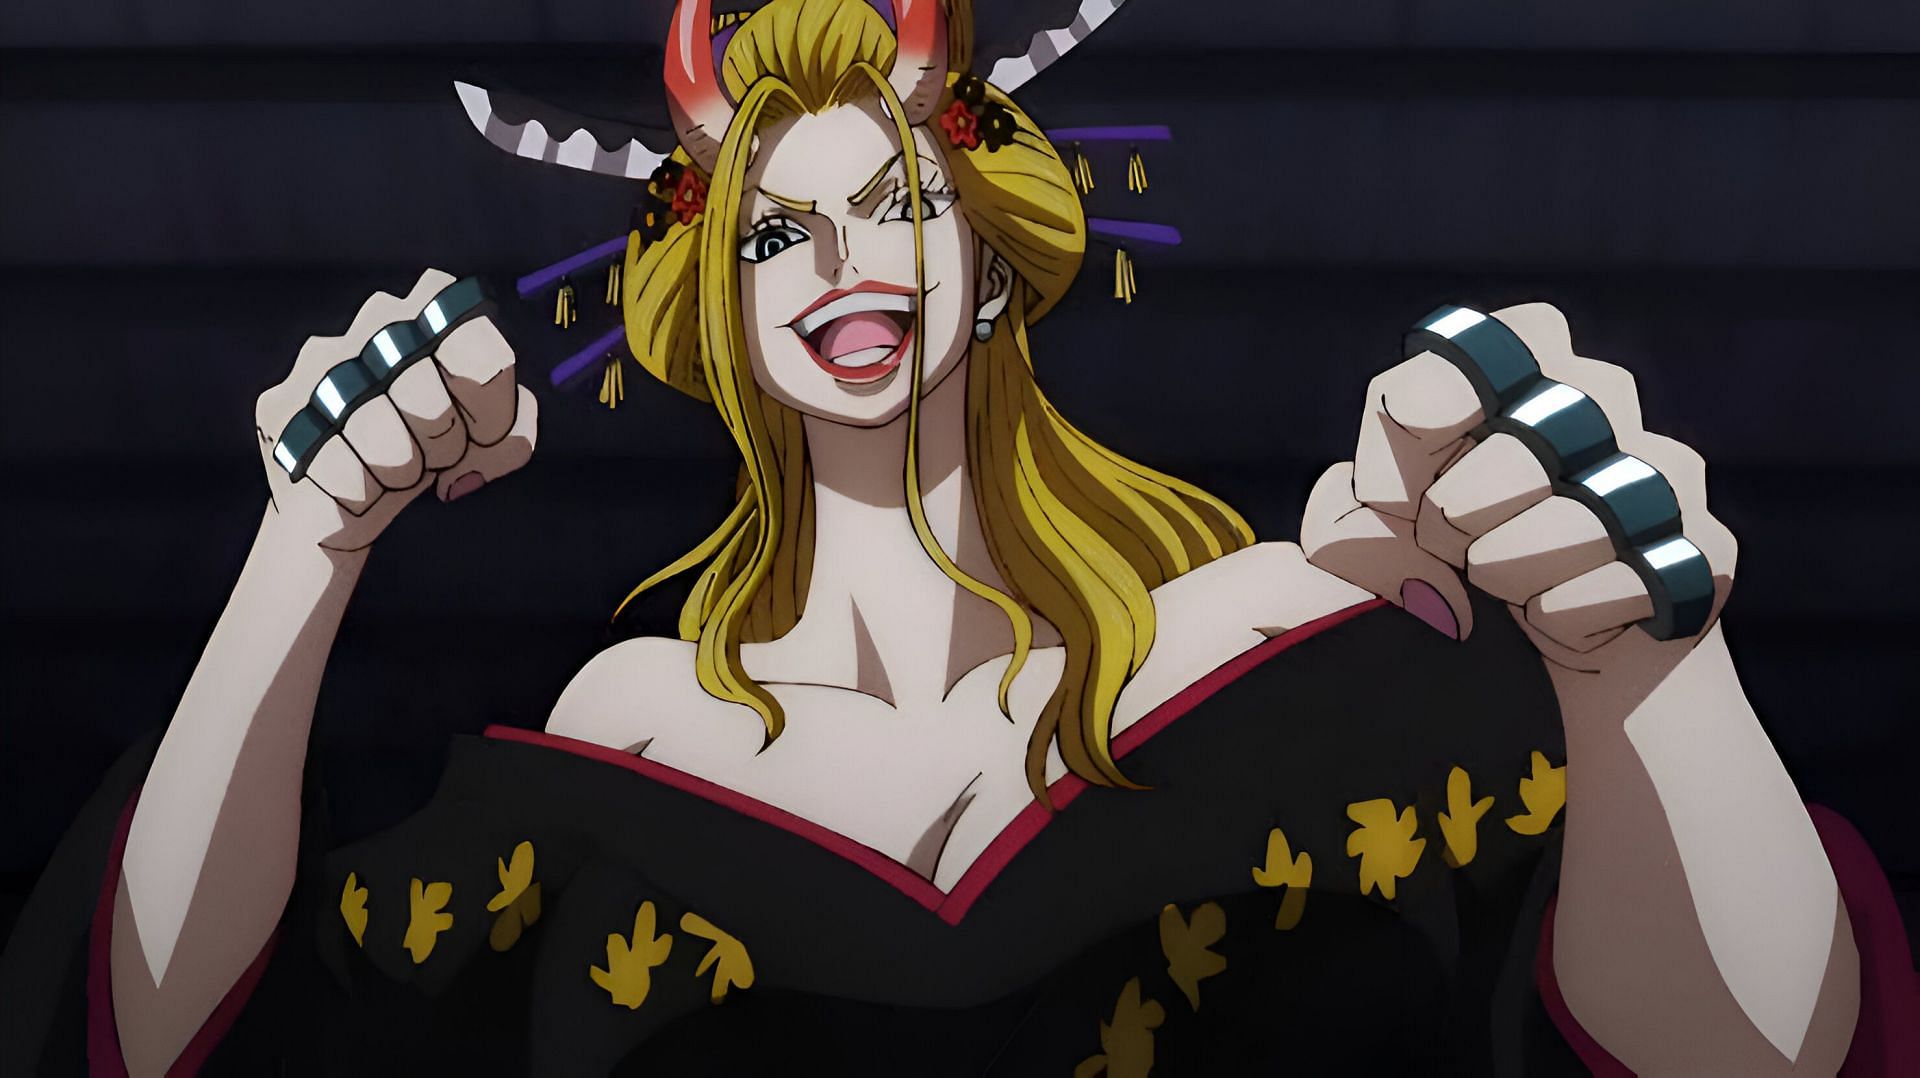 Black Maria as seen in the anime (Image via Toei Animation)